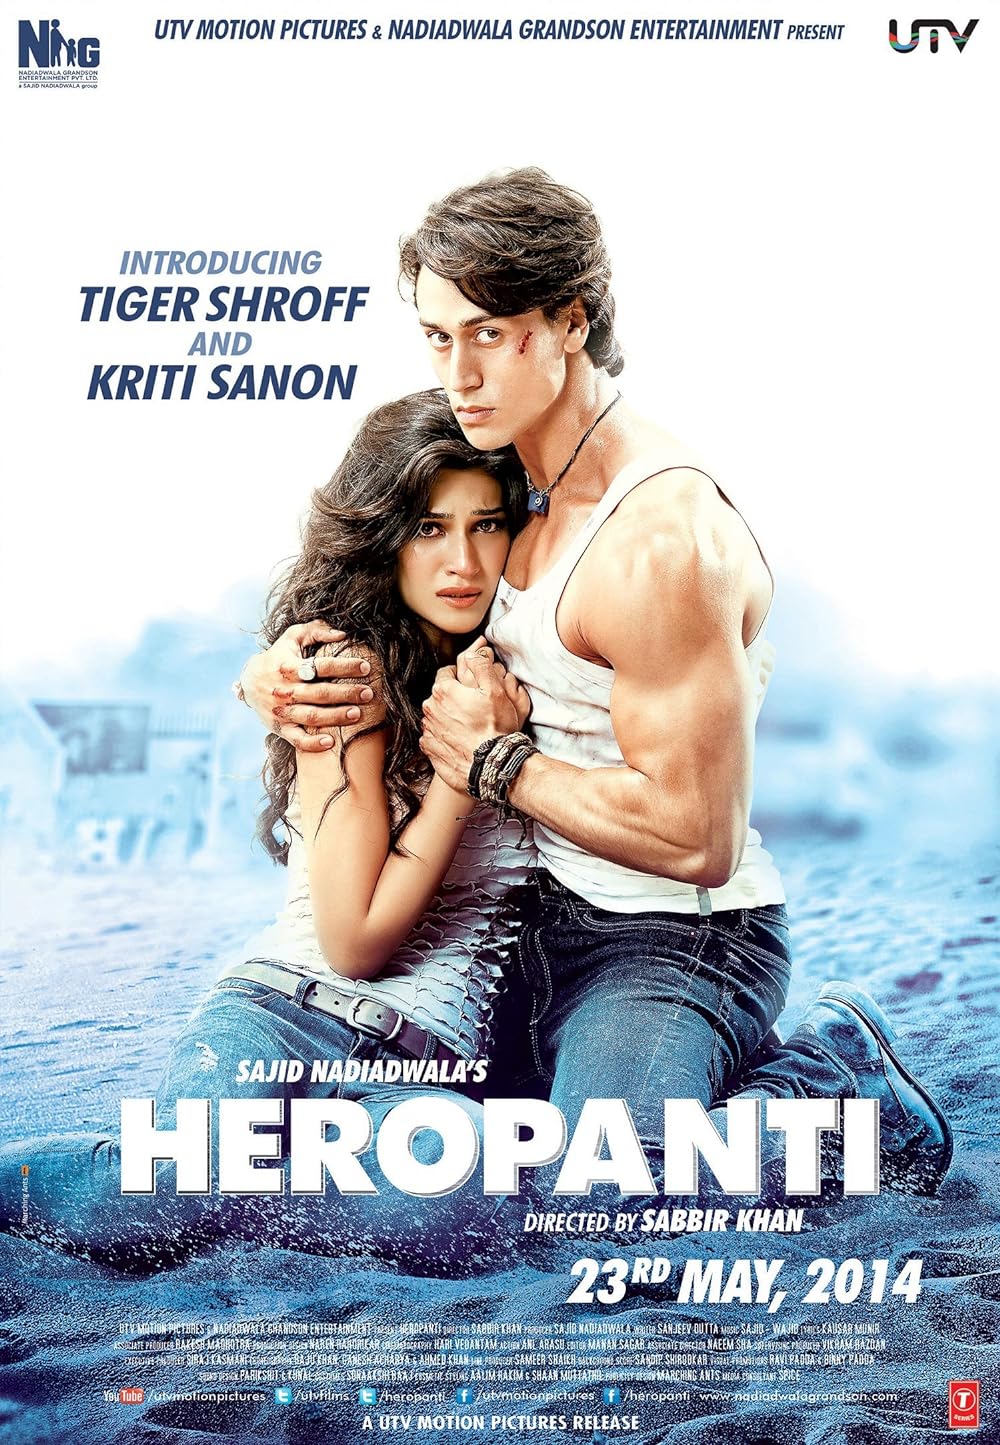 In Heropanti (2014), Kriti Sanon marked her Hindi debut alongside Tiger Shroff. This romantic action film explores the challenges faced by two young lovers as they navigate societal biases and expectations.